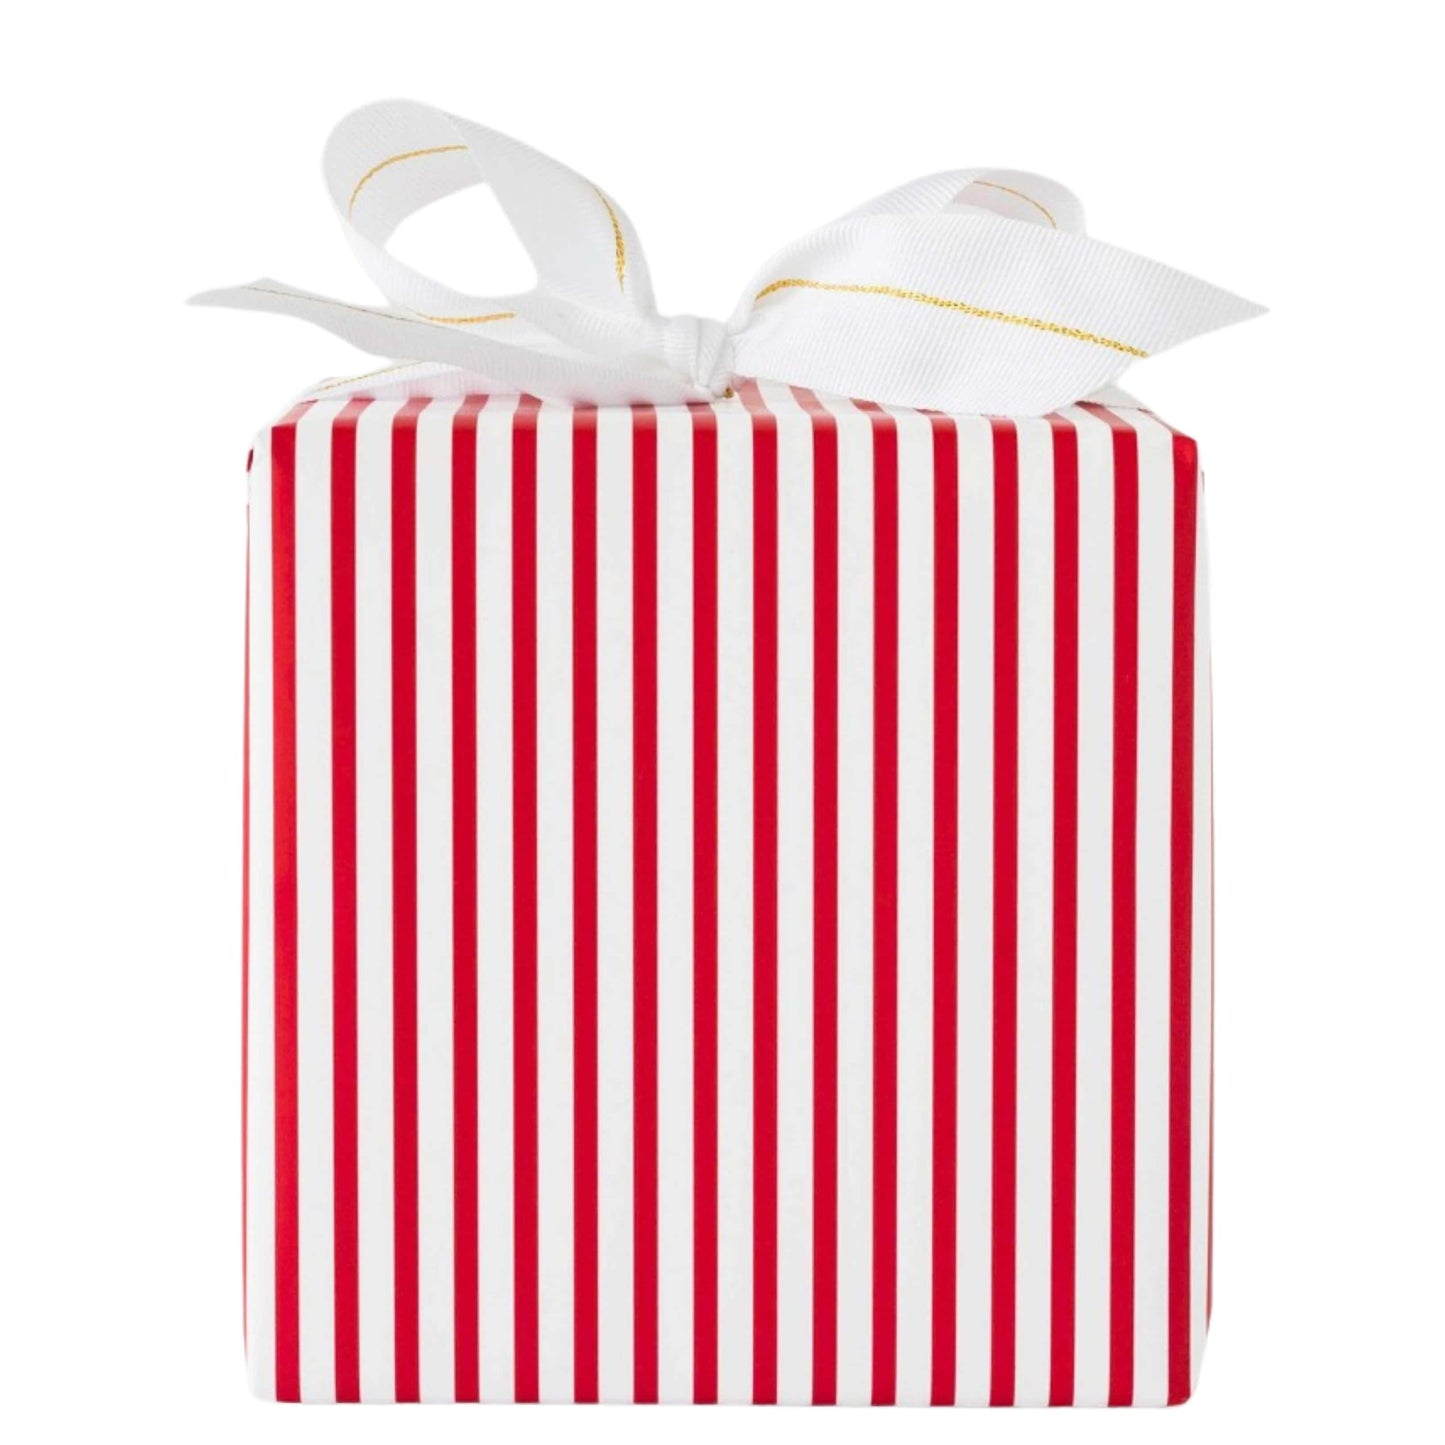 SUGAR PAPER Christmas Decoration SUGAR PAPER - Red Candy Cane Stripe Gift Wrap